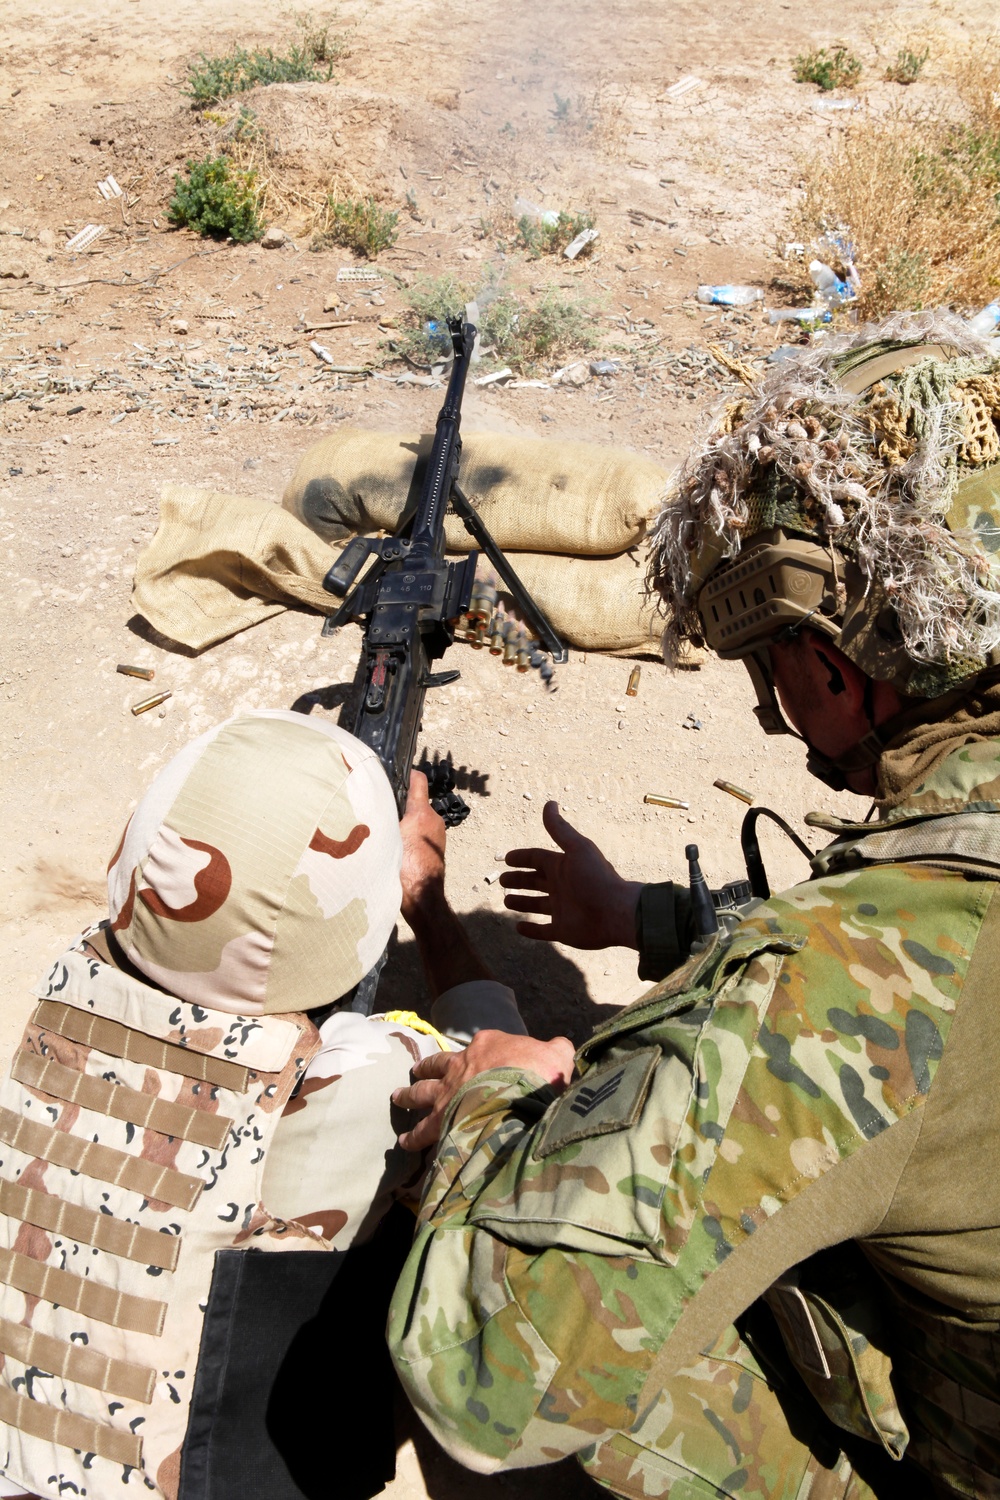 Task Group Taji conducts squad automatic weapons training